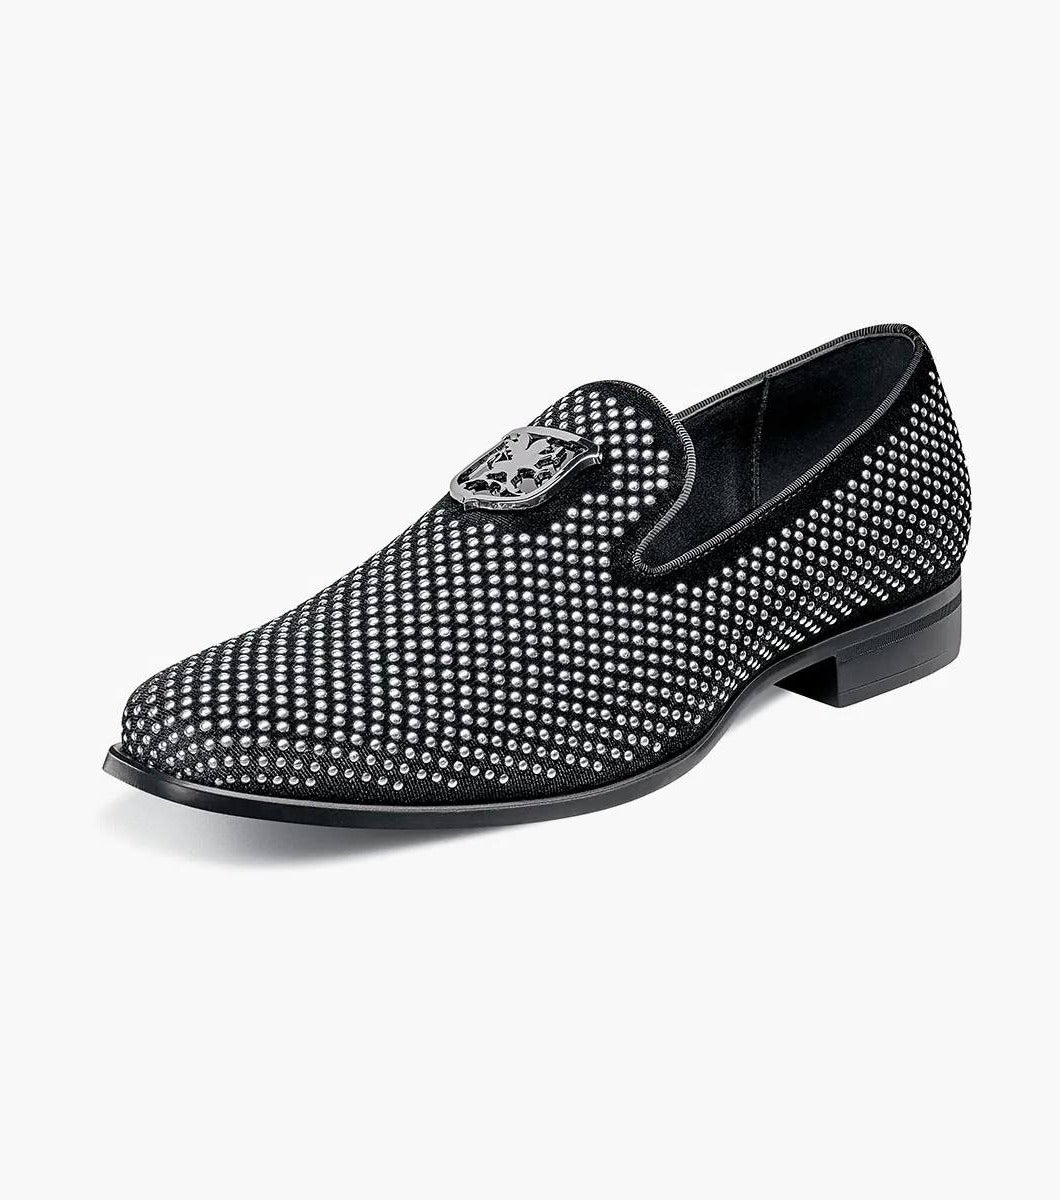 Stacy Adams SWAGGER Studded Slip-on Color: Black and Silver Available in Sizes 10.5-13